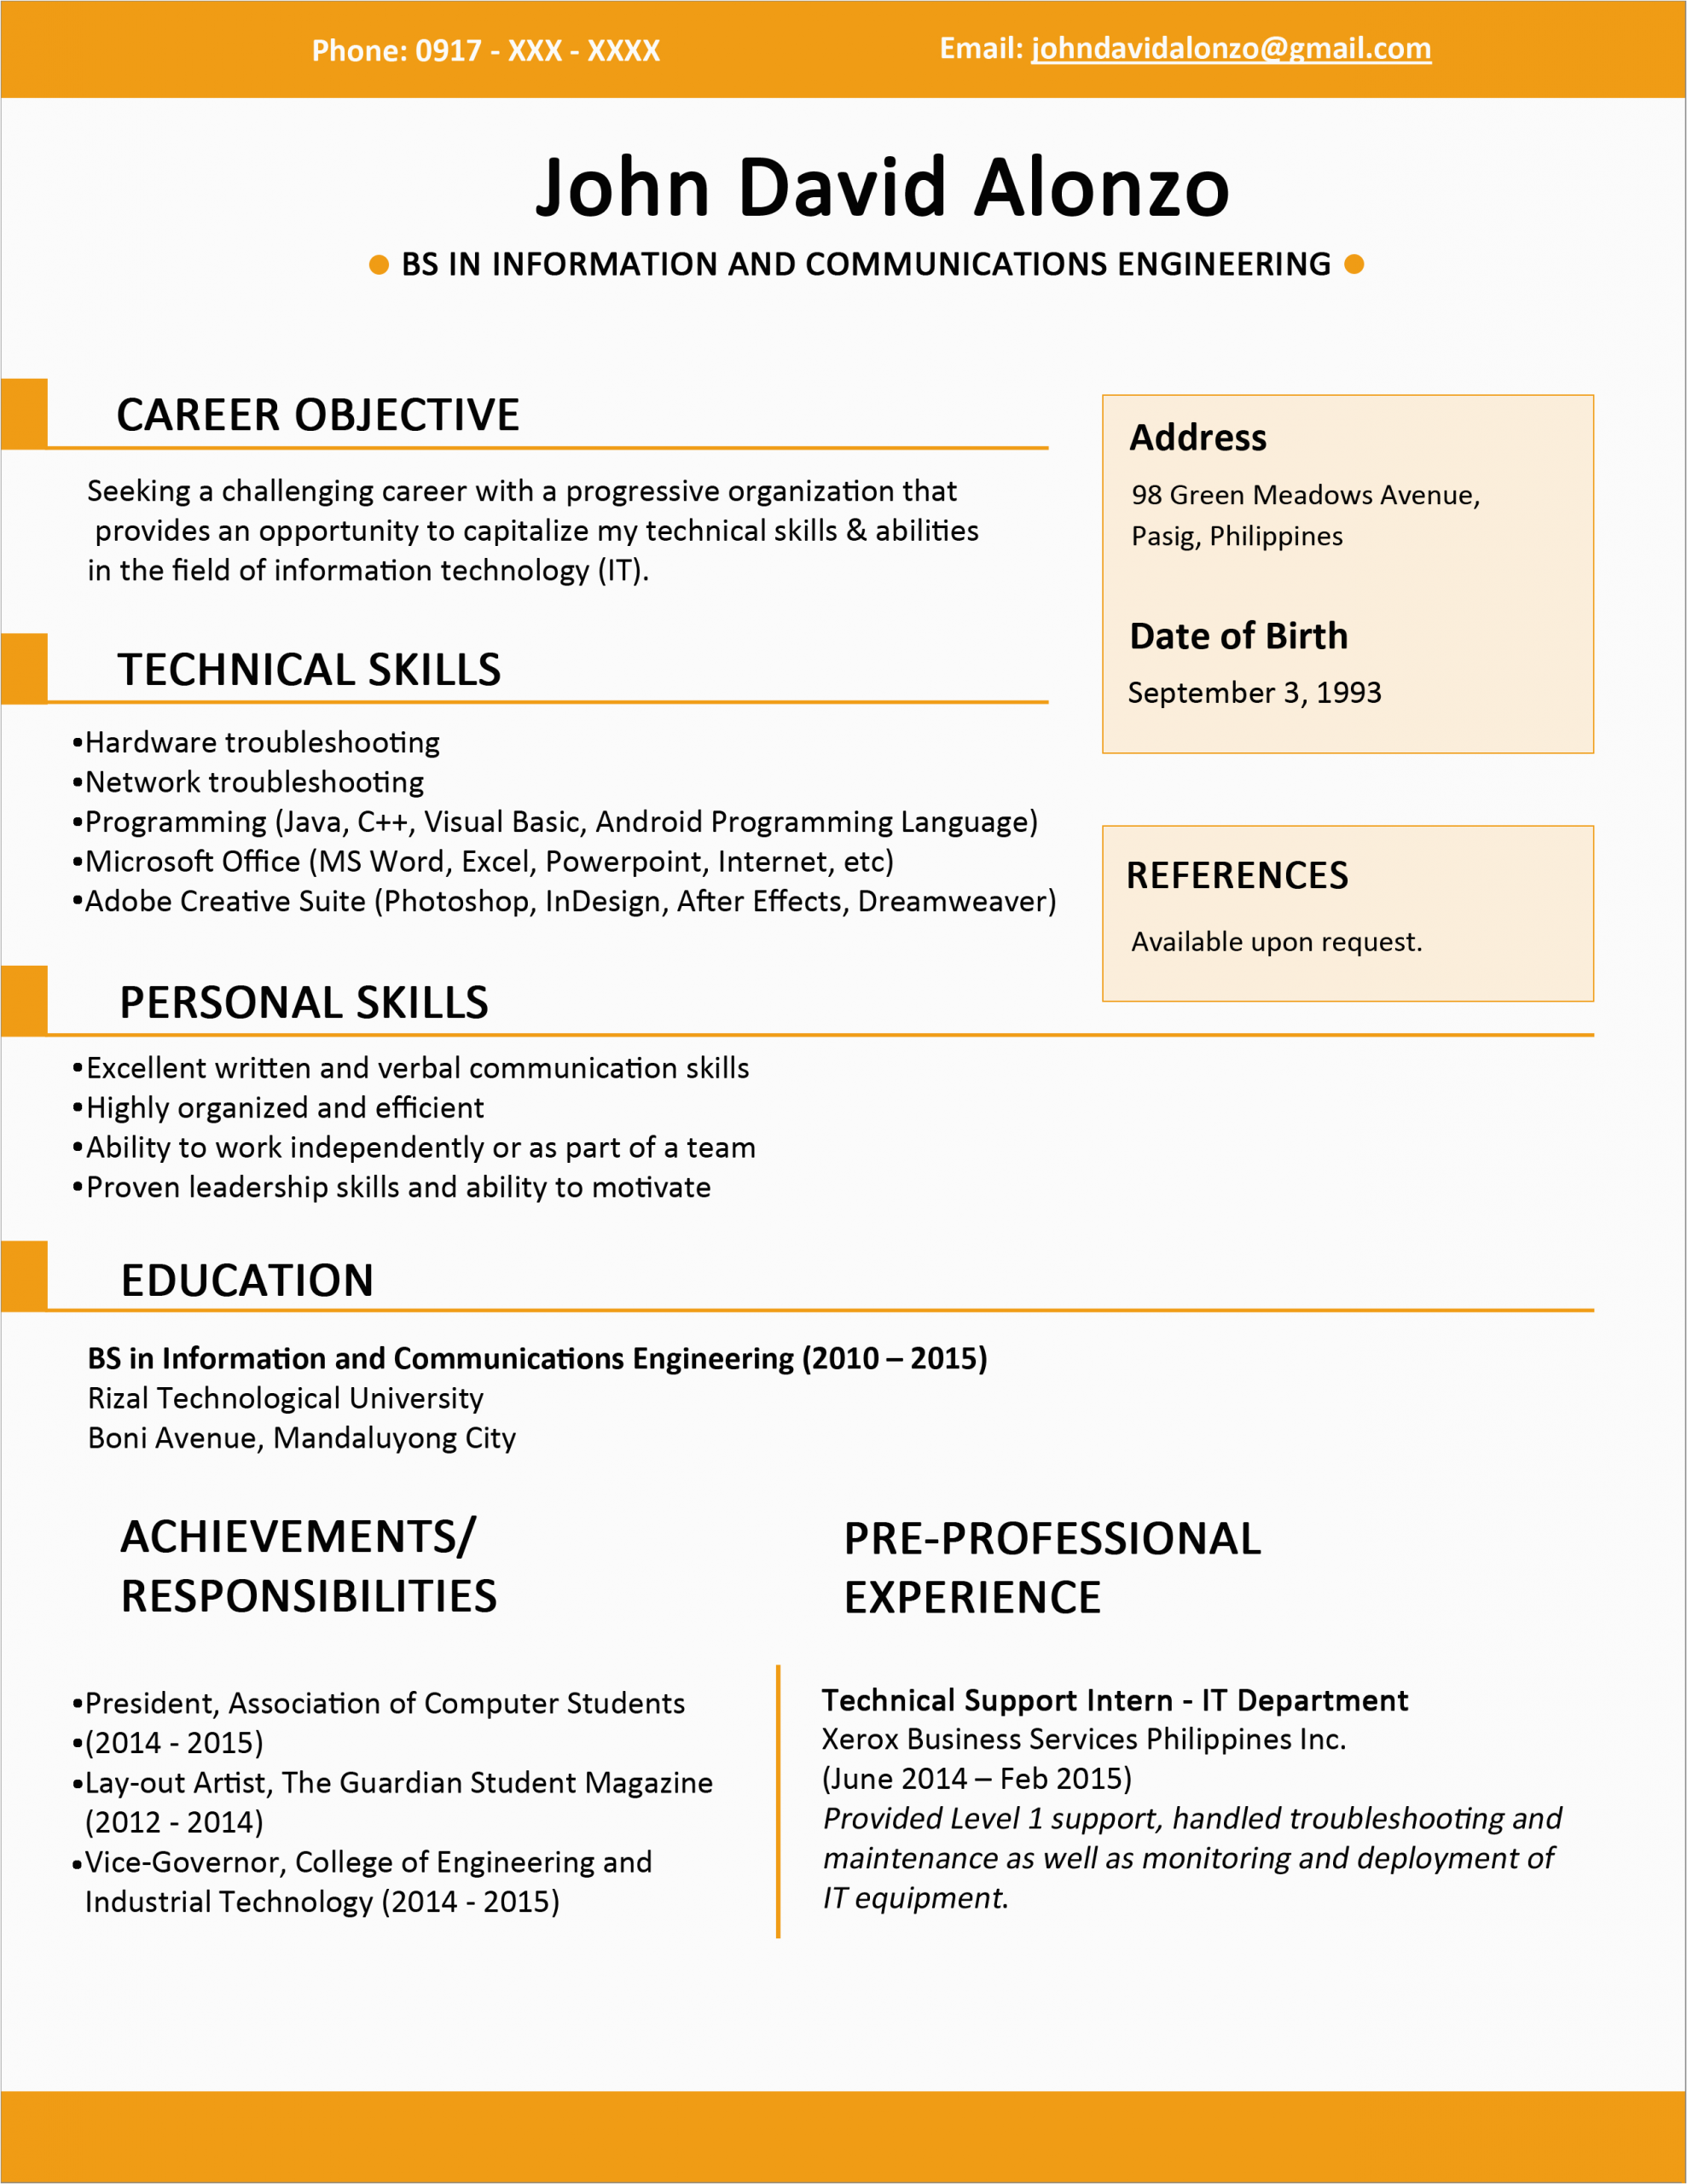 Simple Resume Template for Students Free Download Cv Sample Jobsdb Resume format